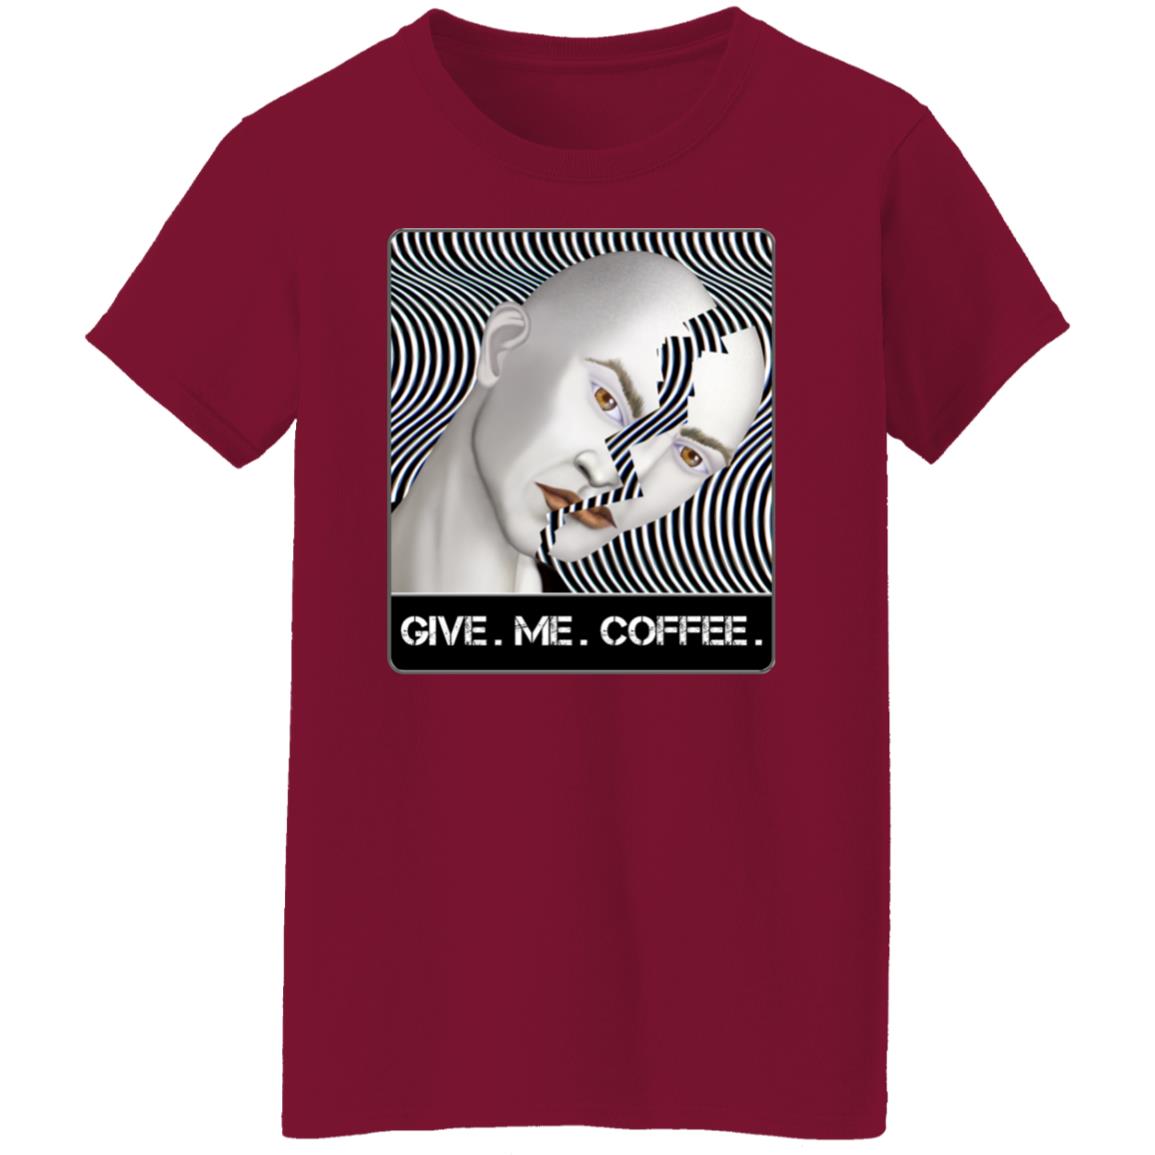 GIVE. ME. COFFEE. - Women's Relaxed Fit T-Shirt